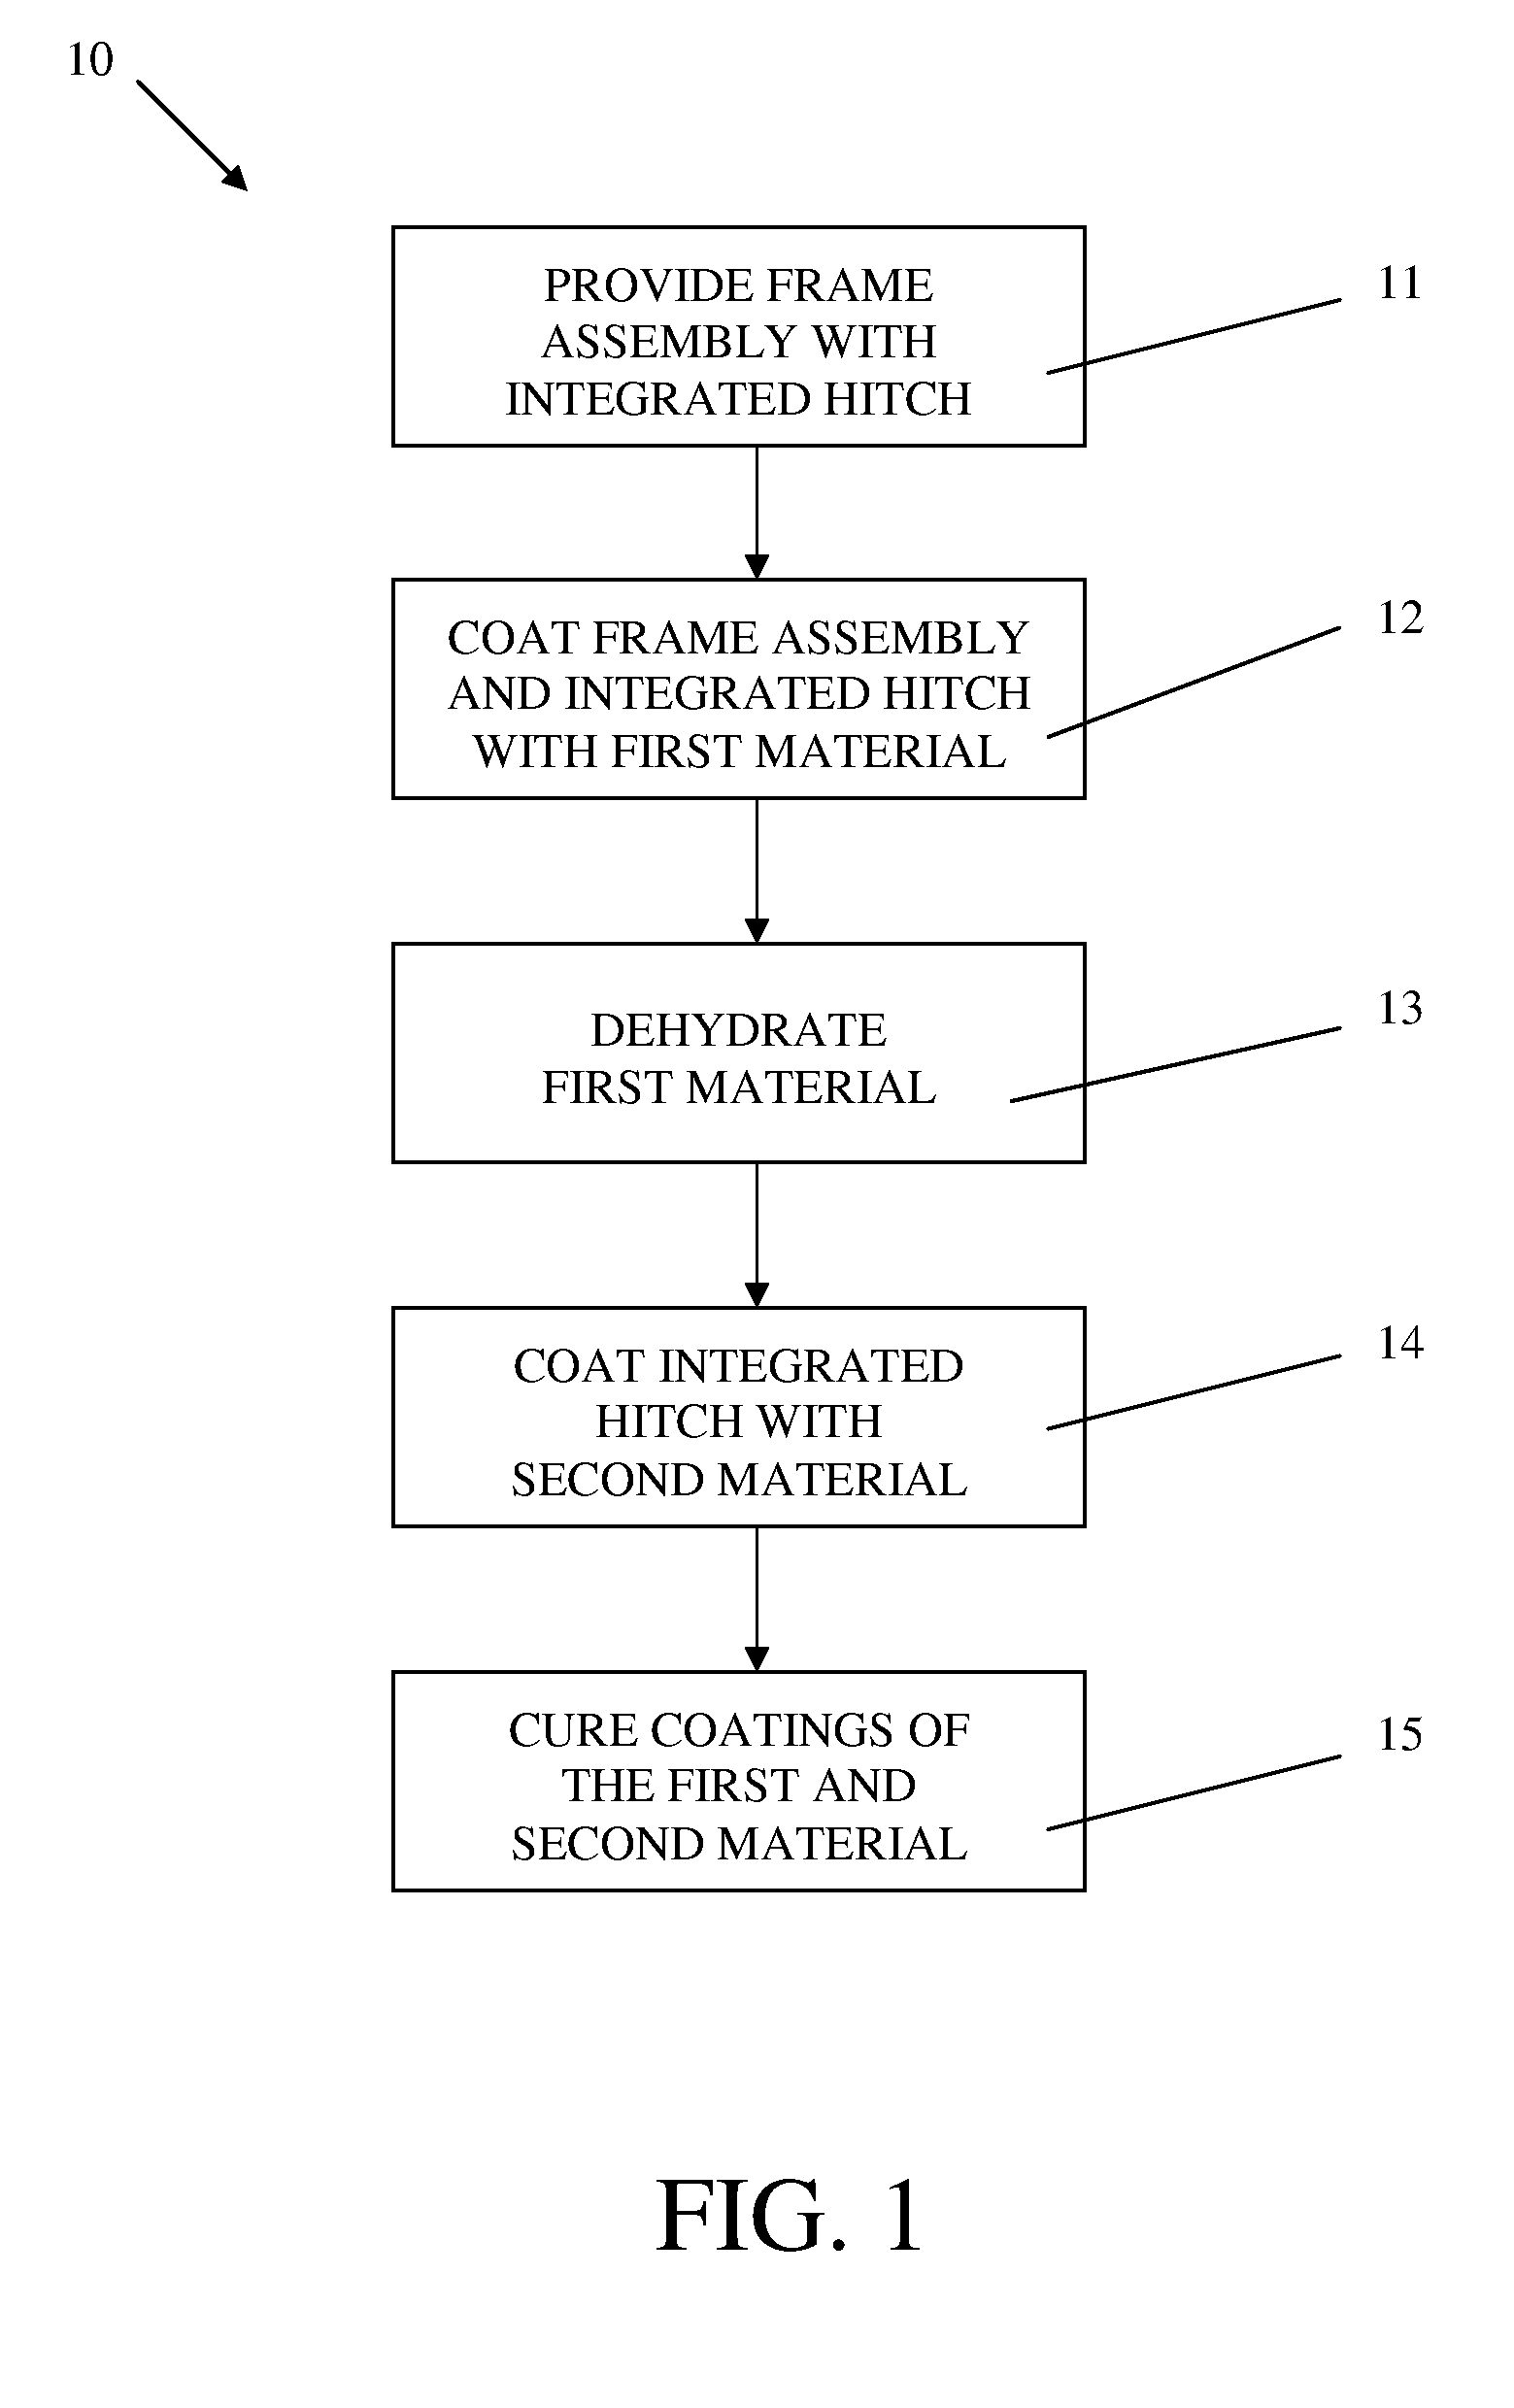 Method of manufacturing a vehicle frame assembly including an integrated hitch having a coating